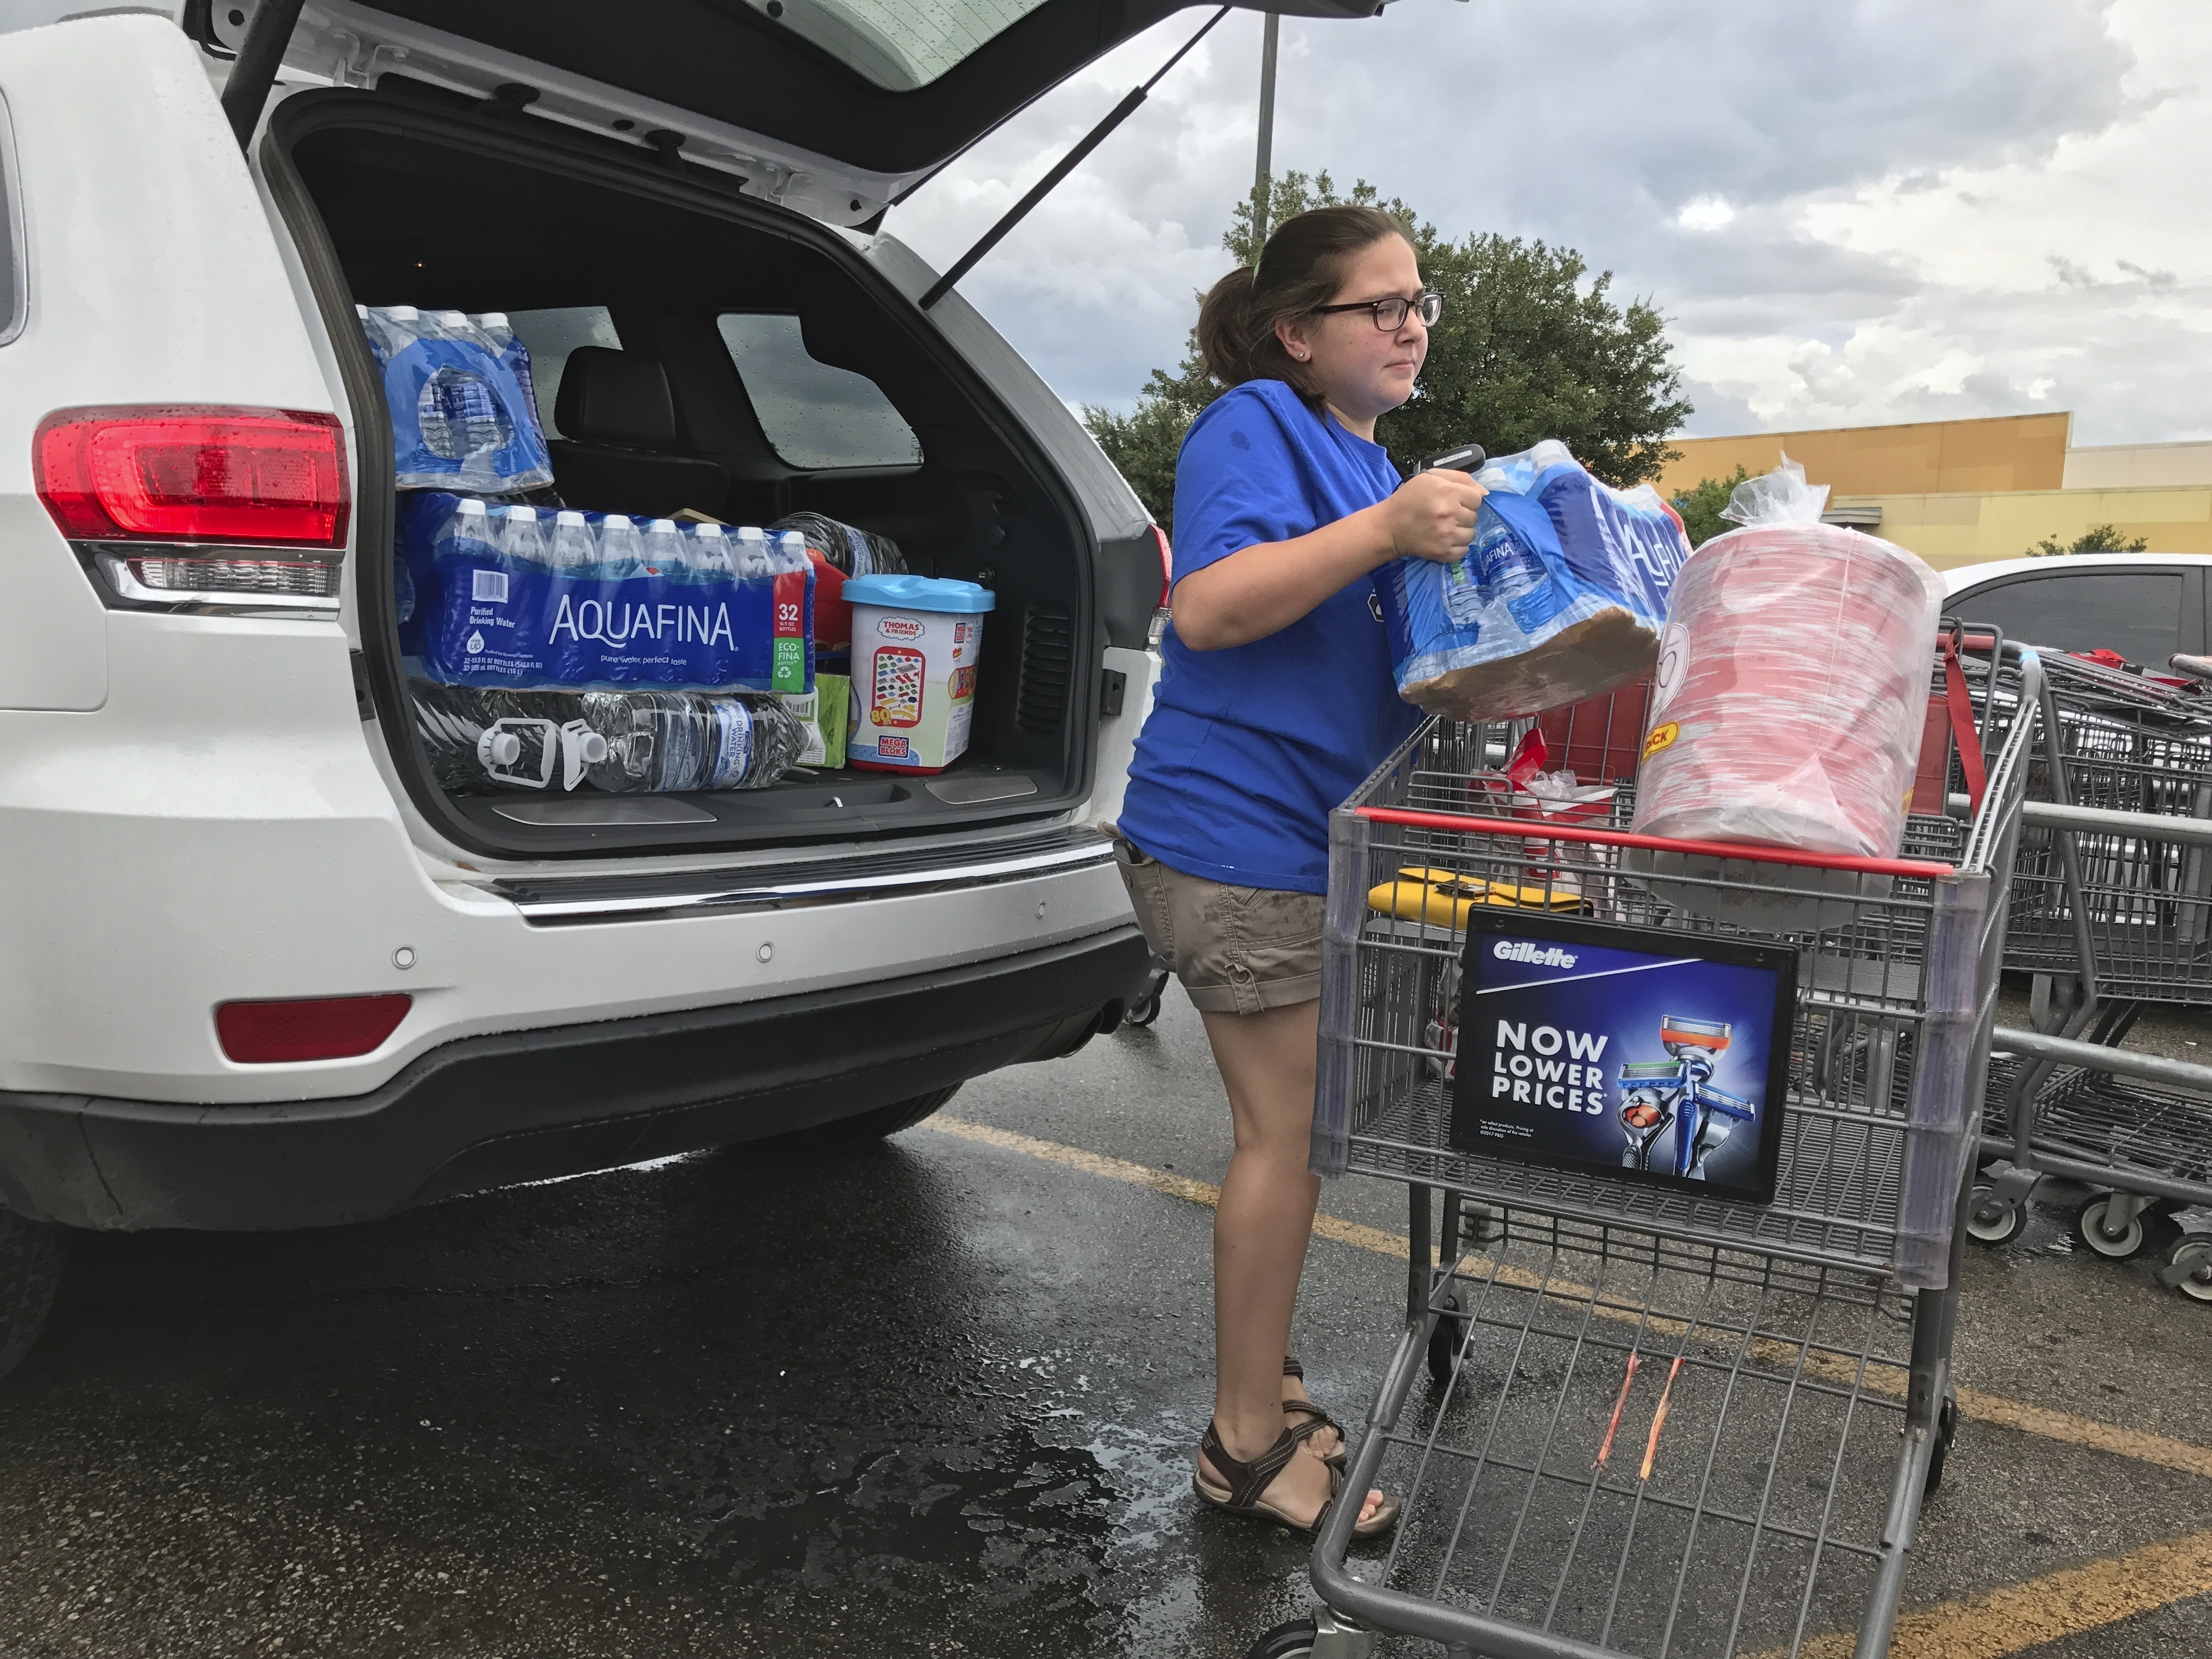 Stephanie Locke stocks up on water at H-E-B on Riverside Drive in Austin, Texas, in preparation for severe weather expected to hit central Texas connected to Hurricane Harvey. (James Gregg/Austin American-Statesman via AP)